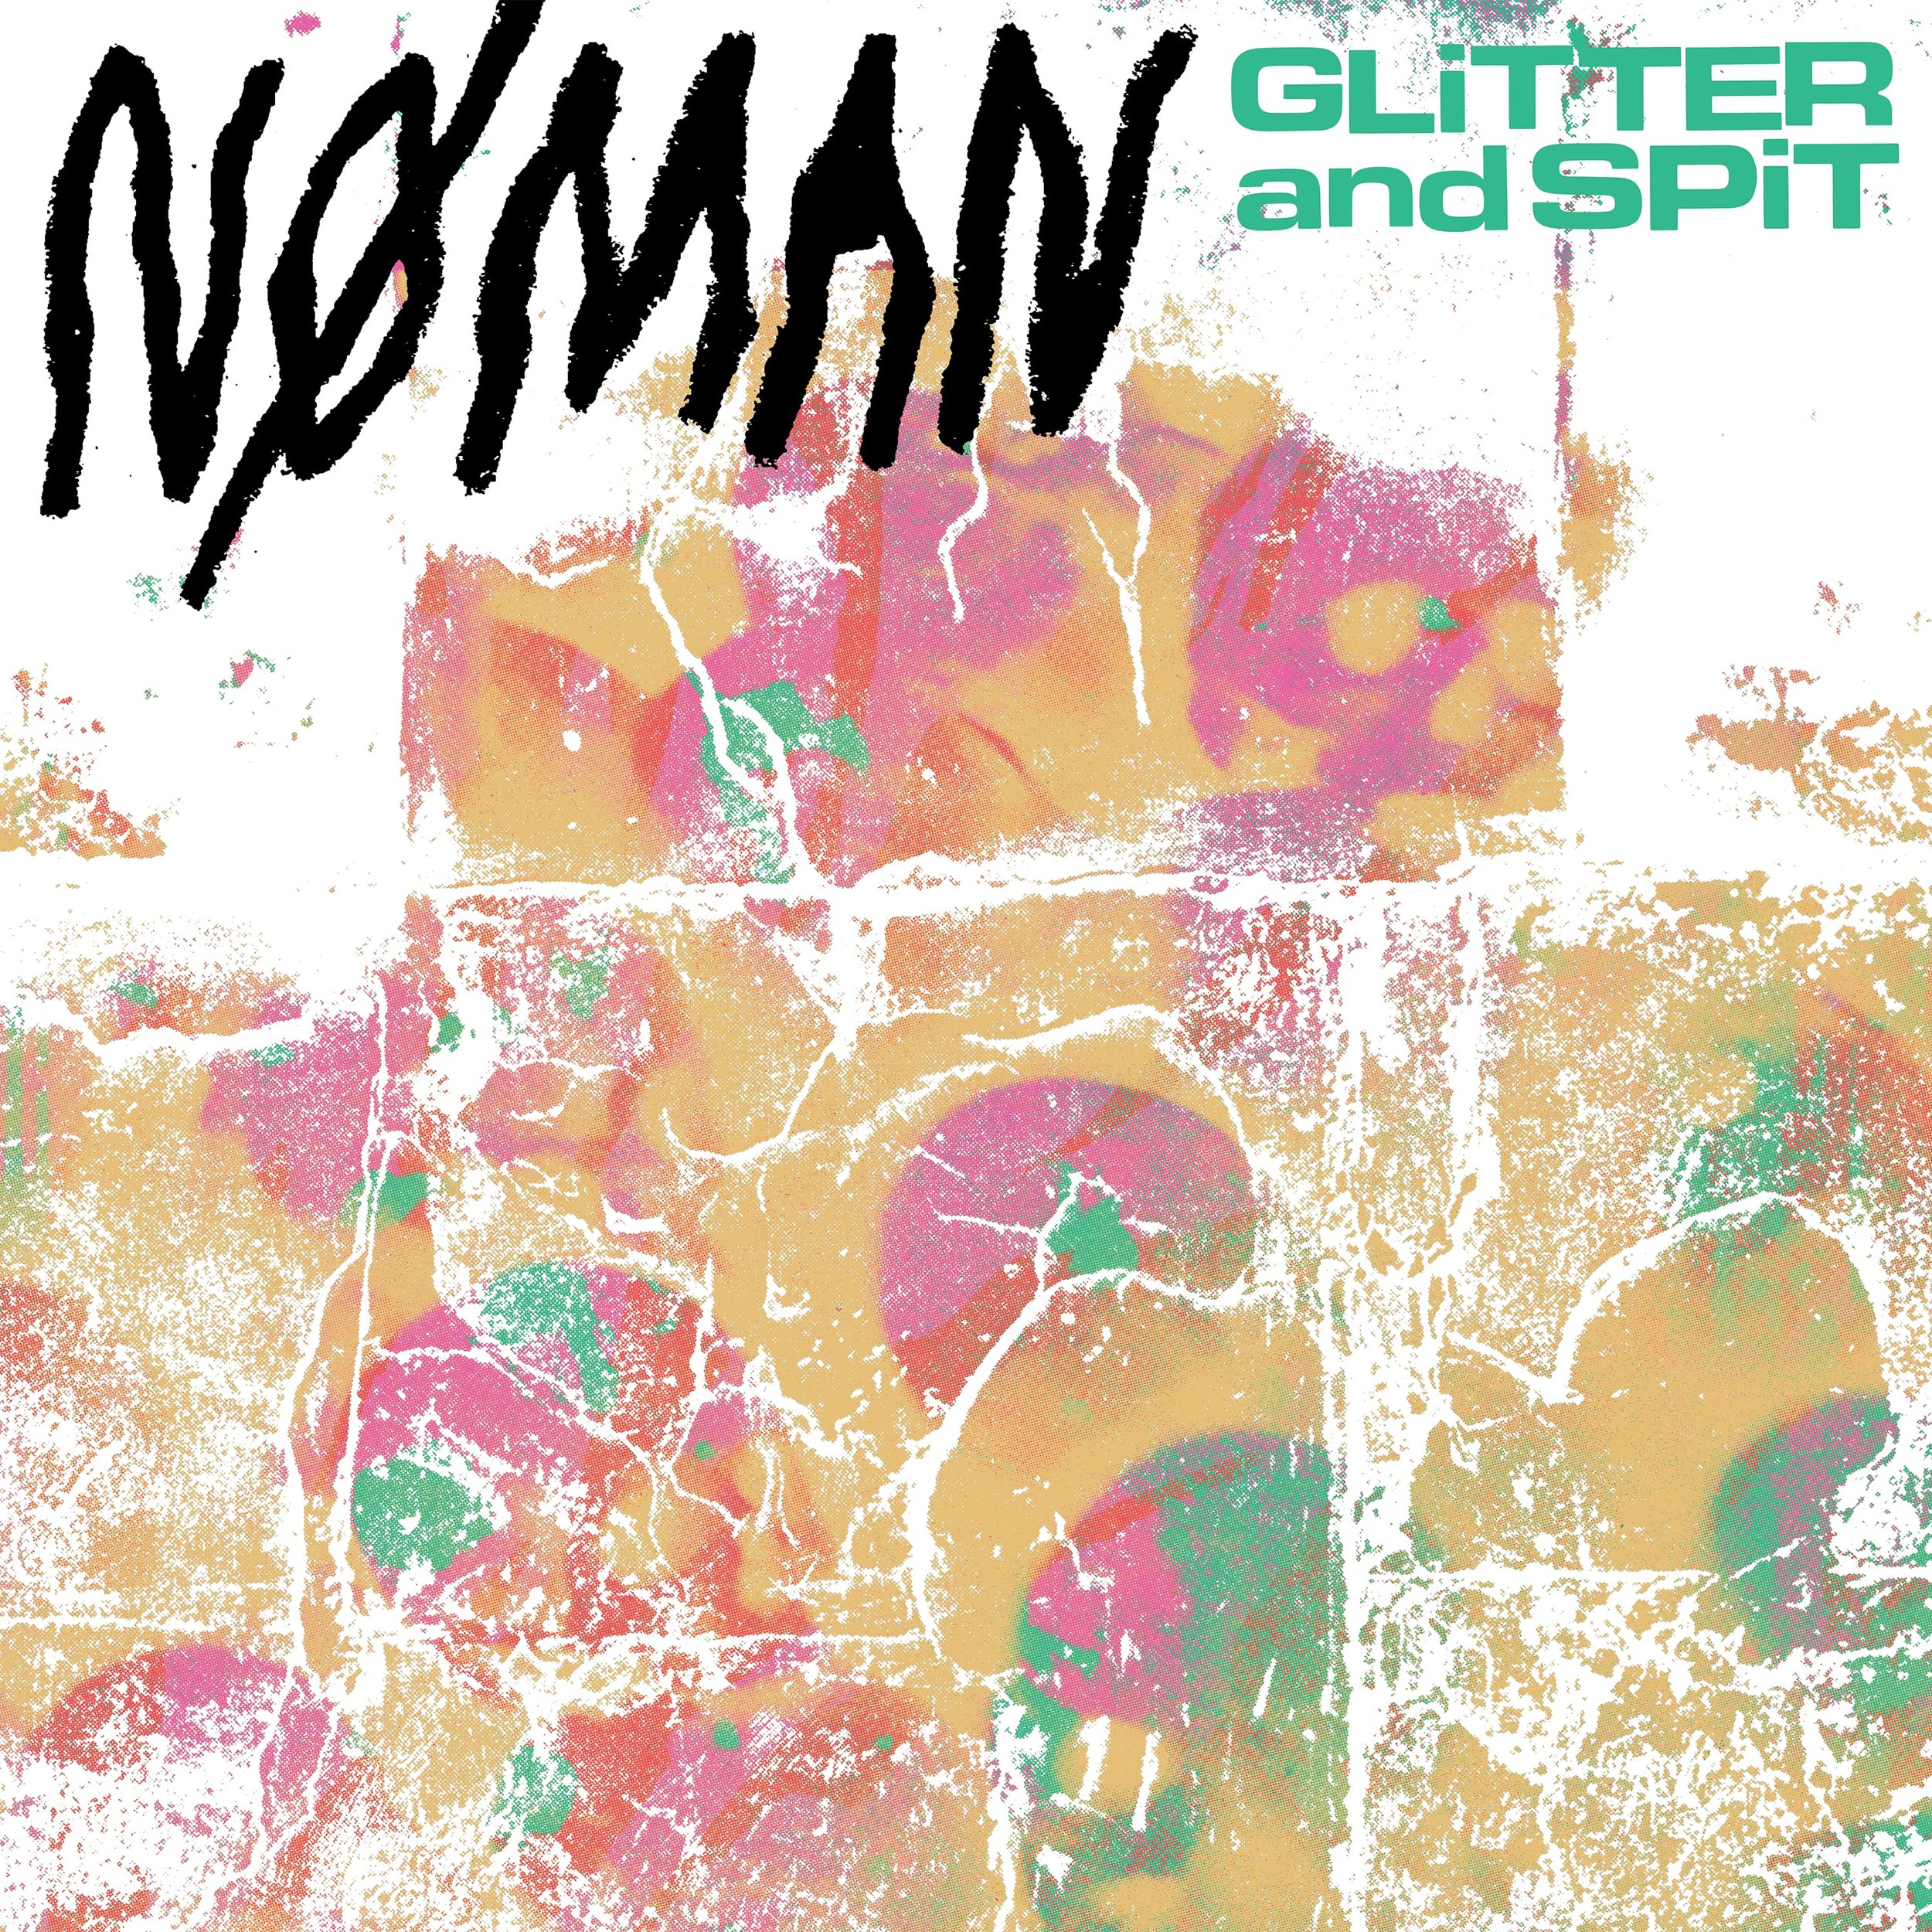 no man - glitter and spit - cover.jpg